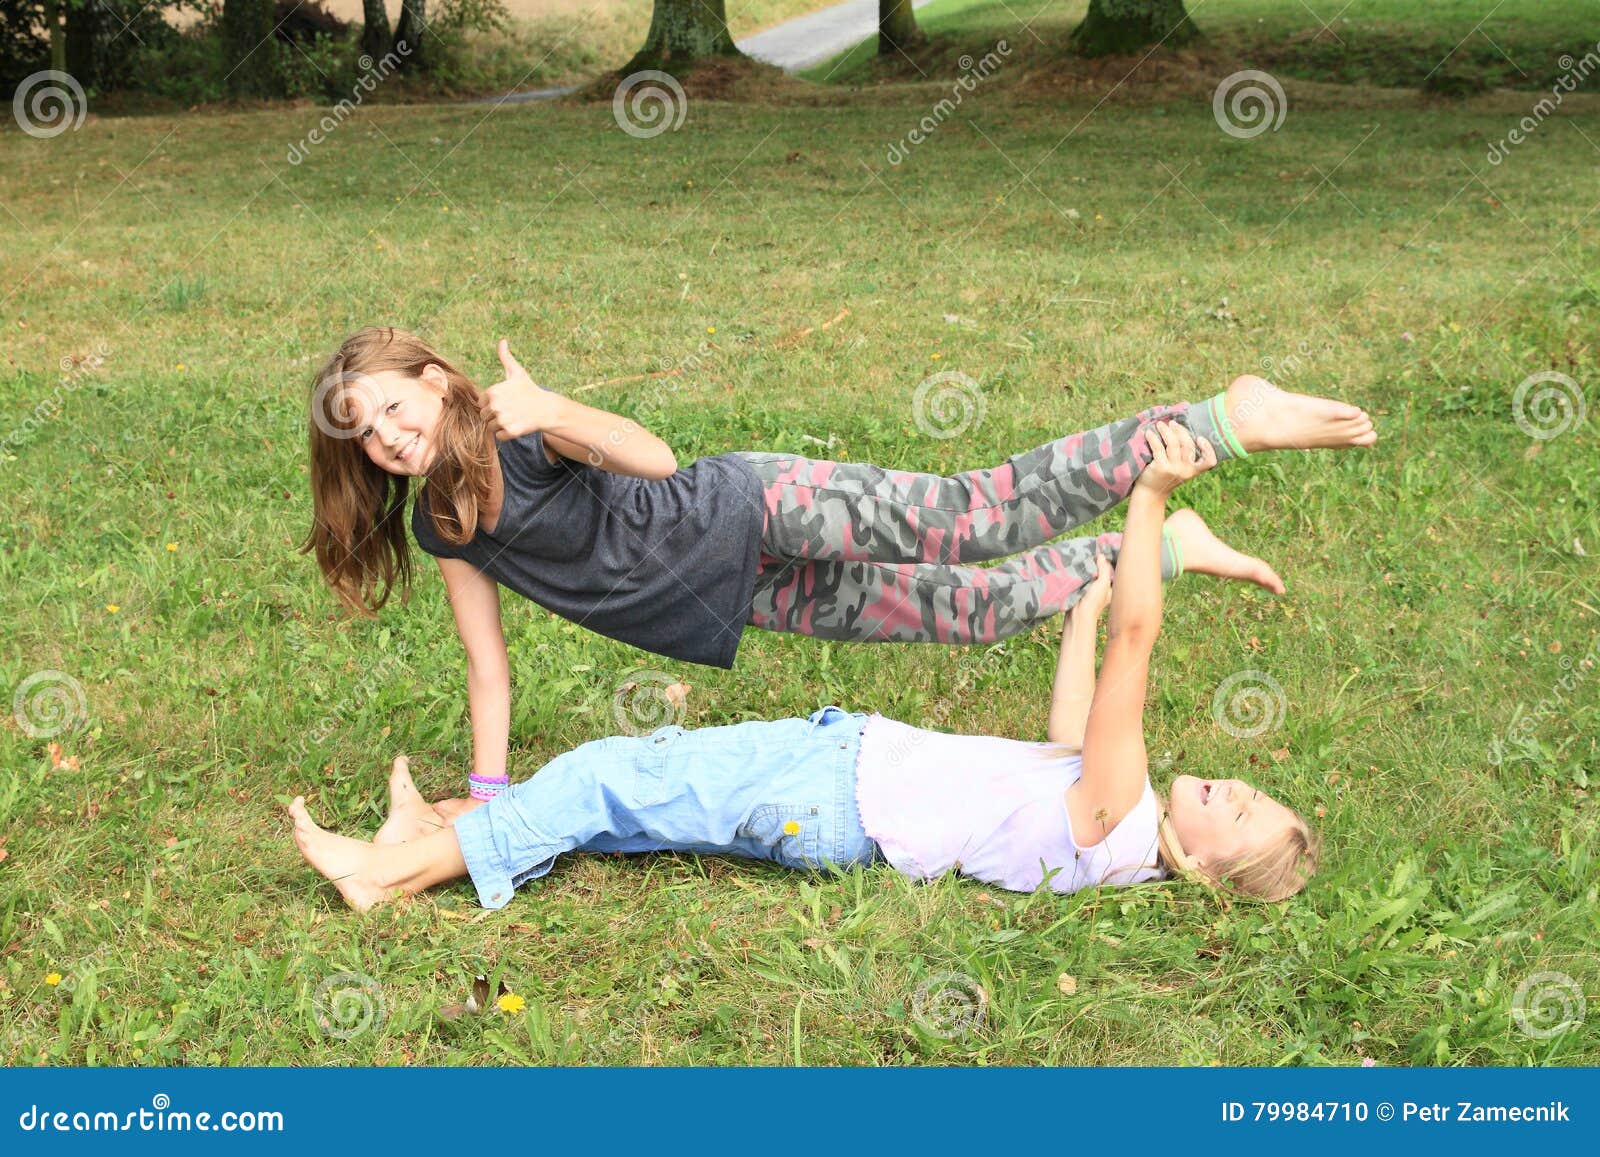 https://thumbs.dreamstime.com/z/two-girls-playing-exercising-yoga-meadow-little-barefoot-kids-supported-exercises-one-above-another-thumb-up-79984710.jpg